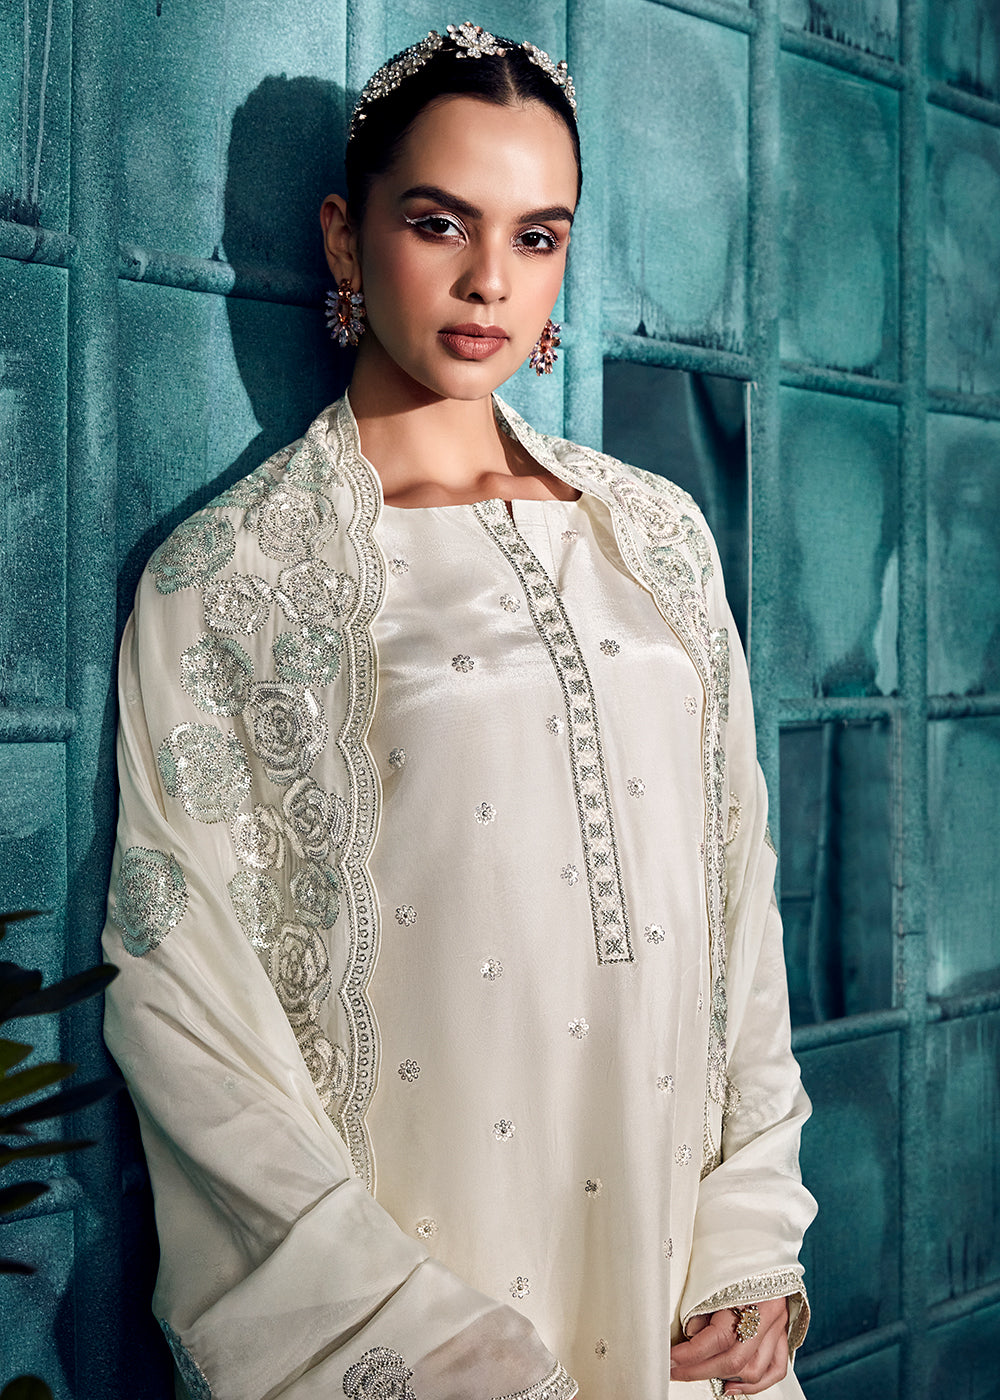 Buy Now Pearl White Modale Silk Embroidered Festive Salwar Suit Online in USA, UK, Canada, Germany, Australia & Worldwide at Empress Clothing.